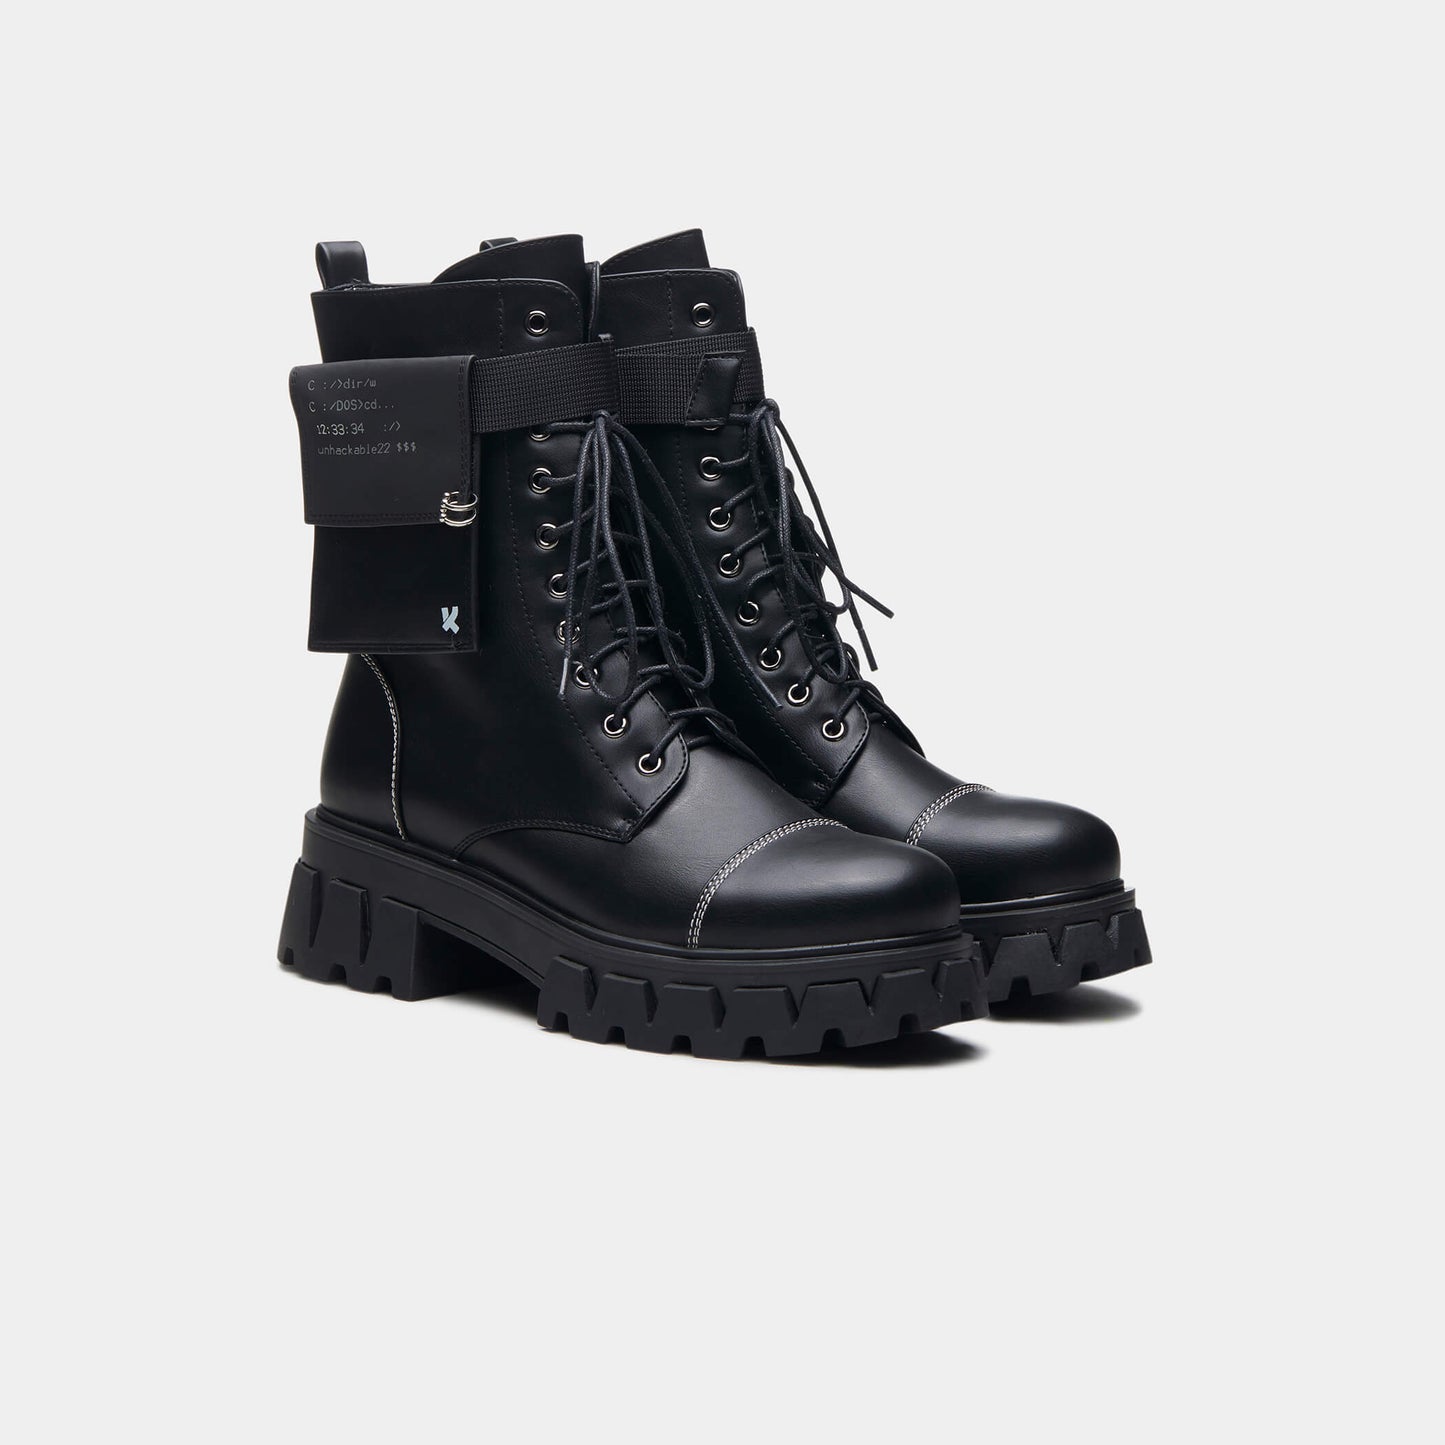 Banshee Fallout Cyber Boots - Ankle Boots - KOI Footwear - Black - Three-Quarter View